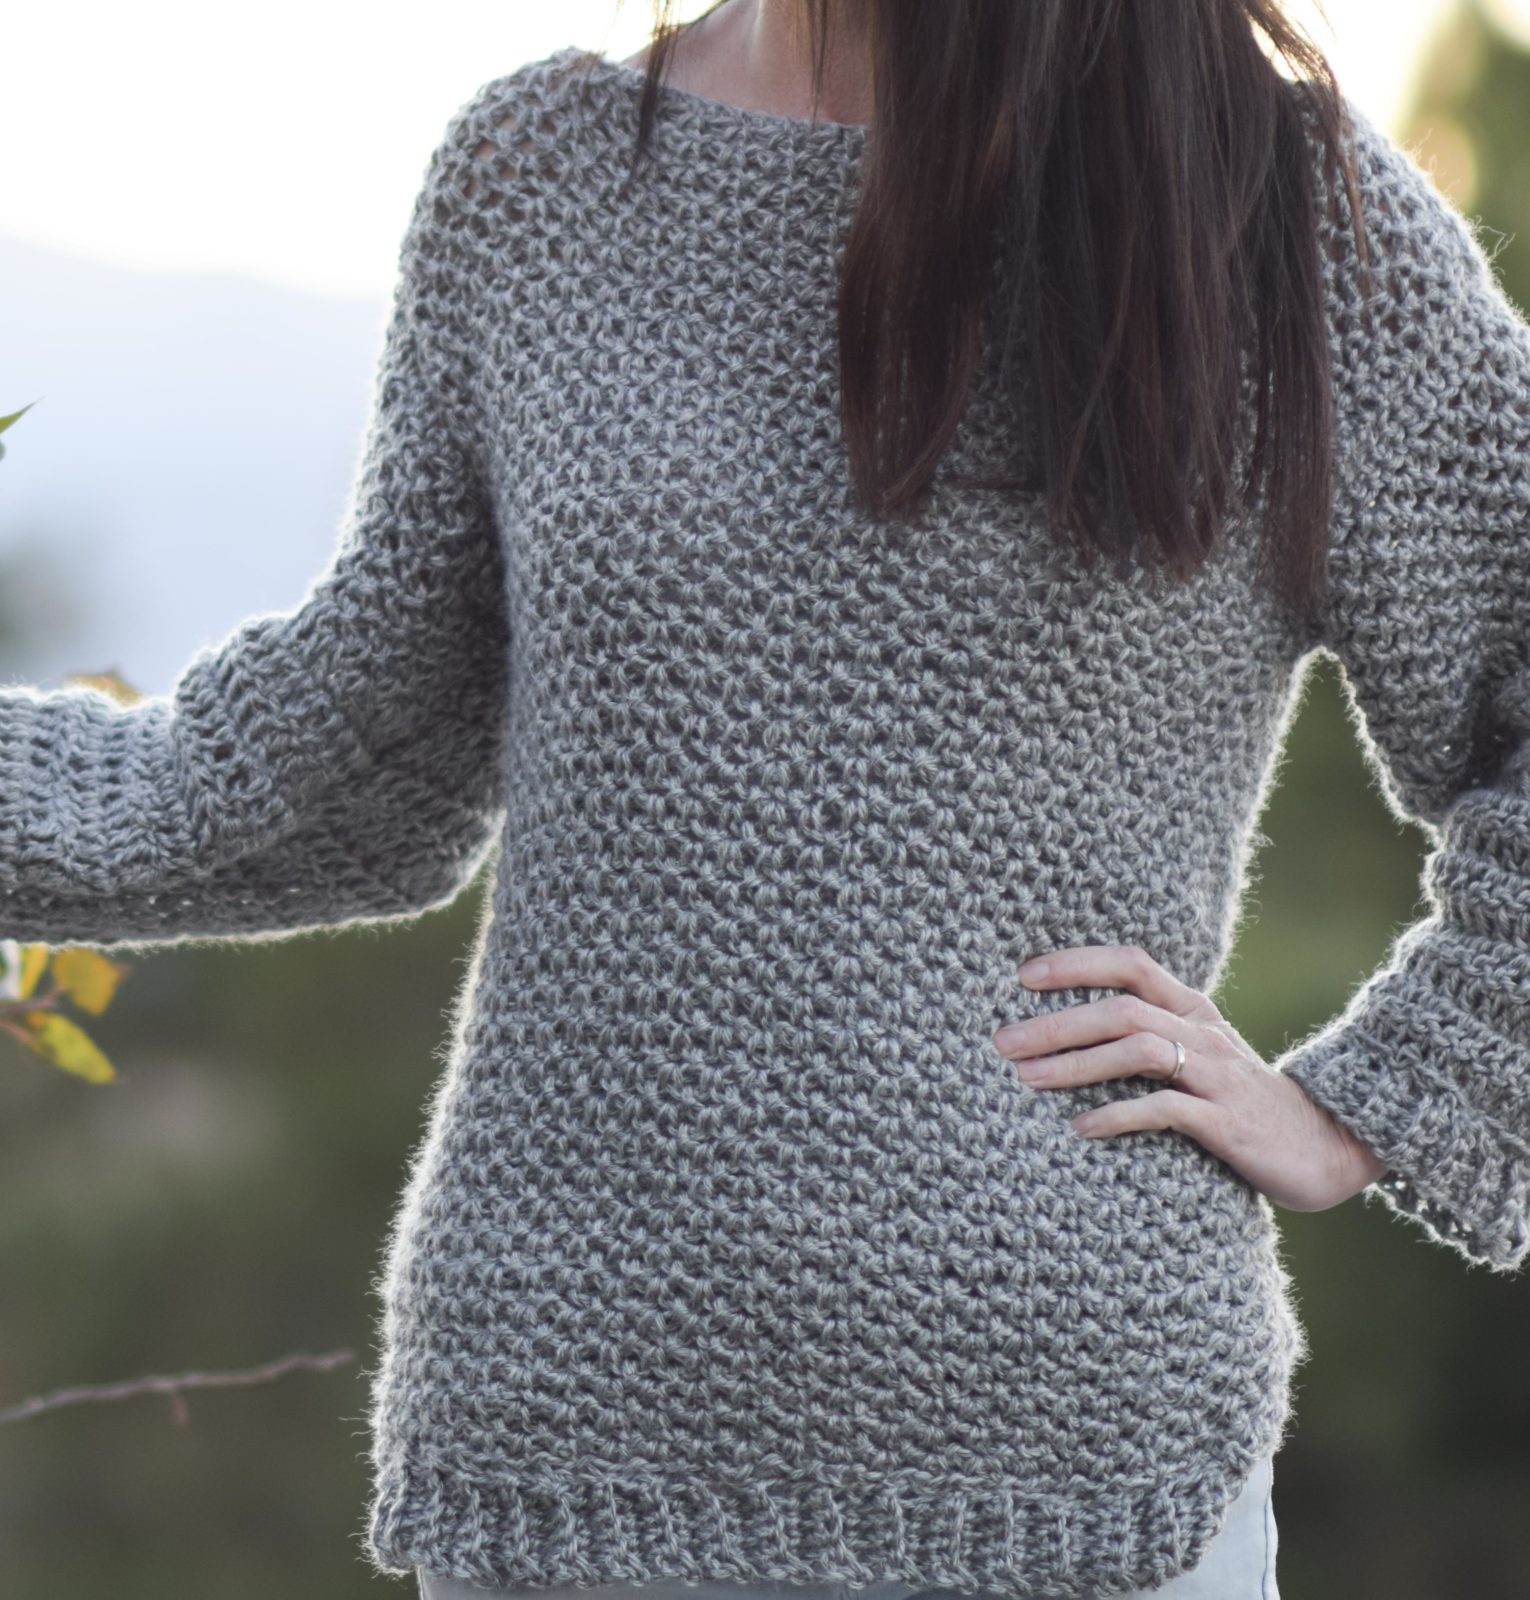 Free Crochet Patterns Womens Sweaters How To Make An Easy Crocheted Sweater Knit Like Mama In A Stitch